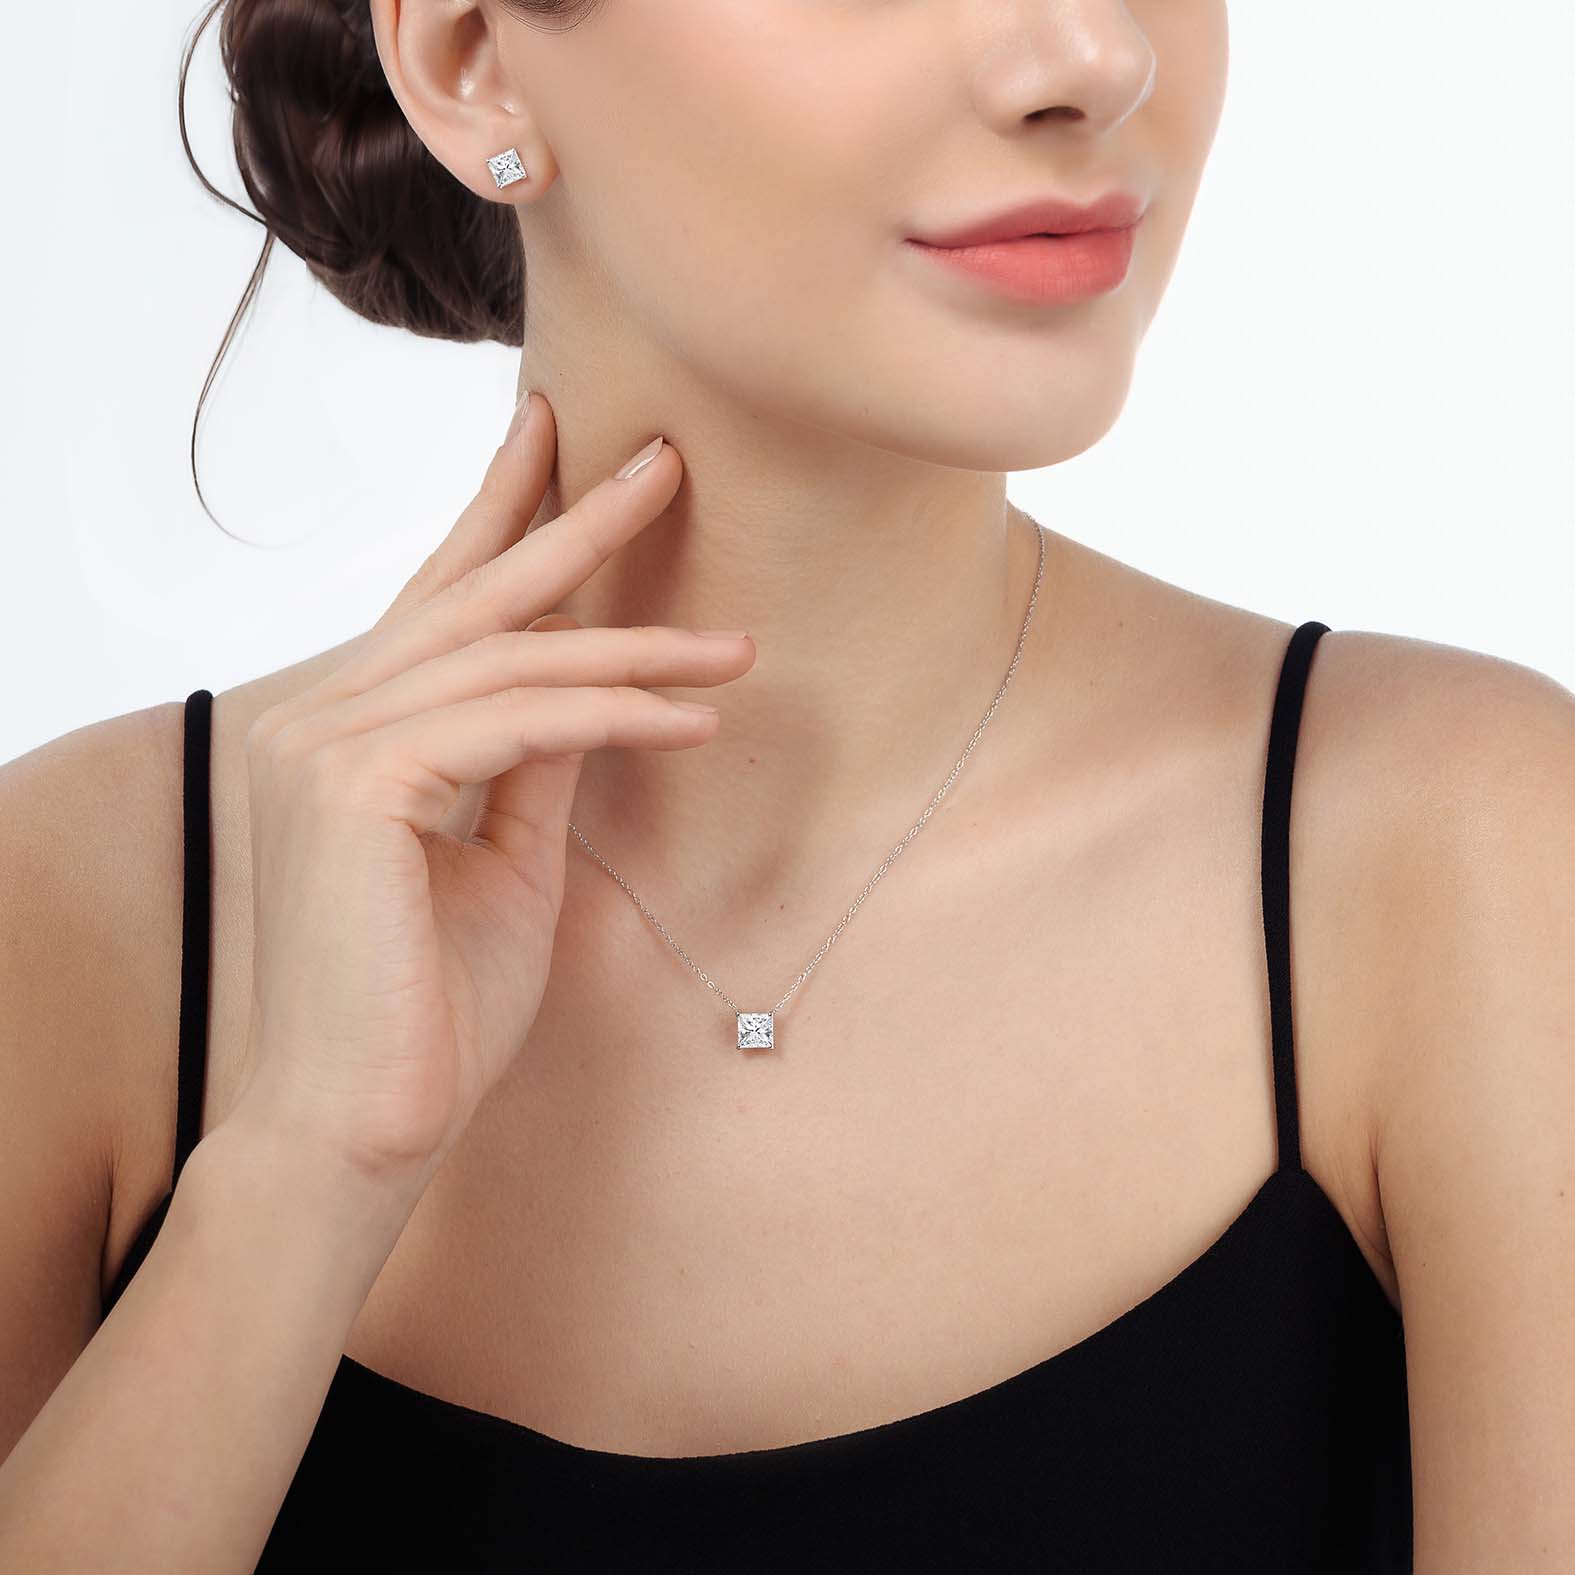 Princess Solitaire Necklace in 2CT (Model) - Eclat by Oui